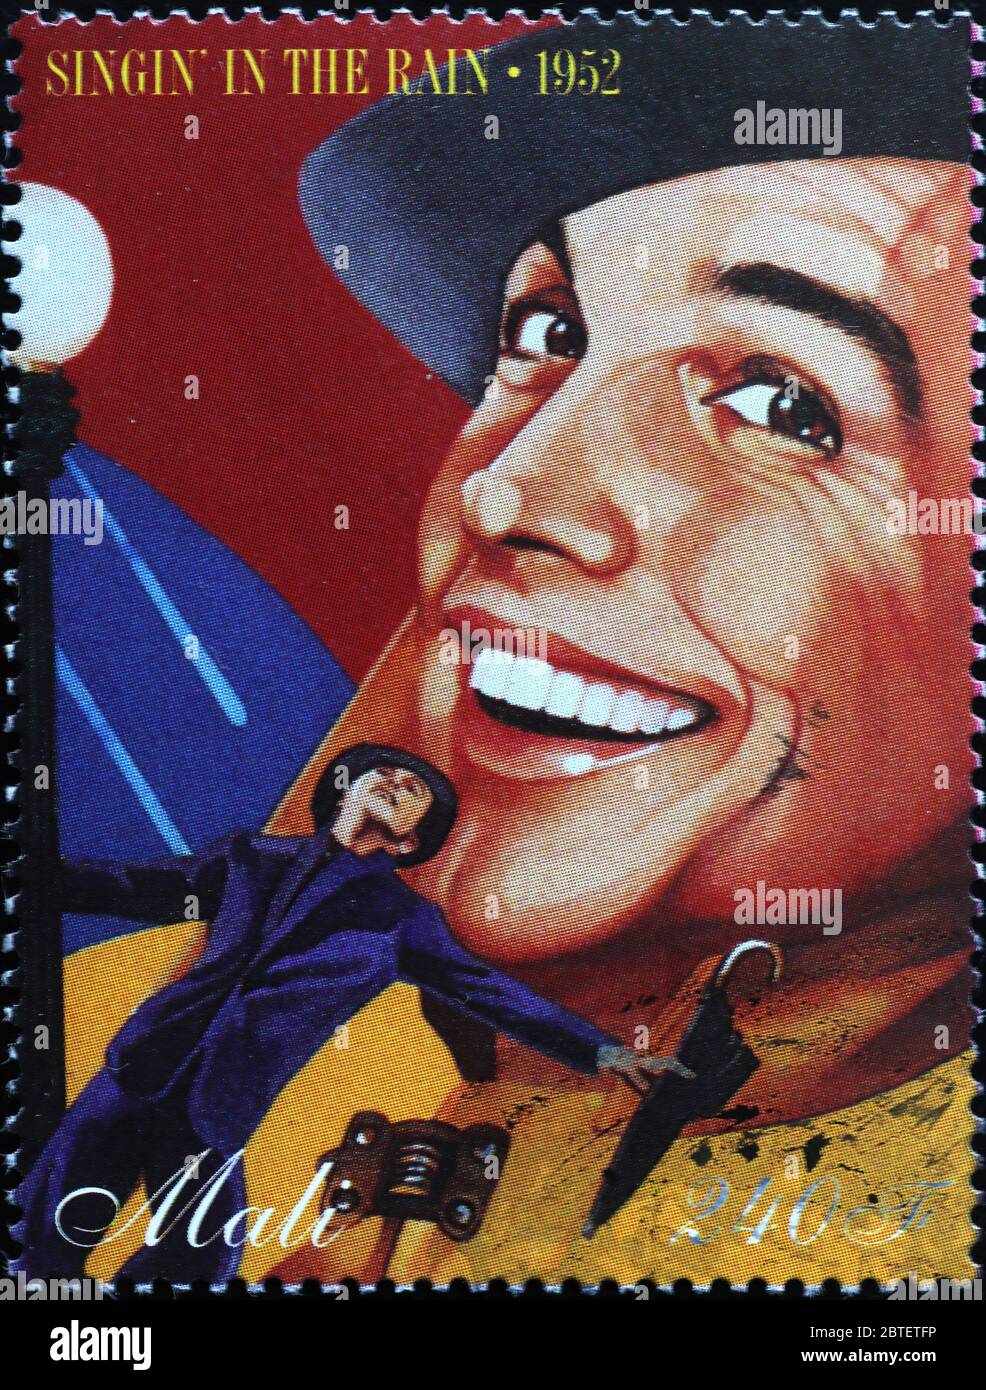 Vincent Minnelli in SInging in the rain on stamp Stock Photo